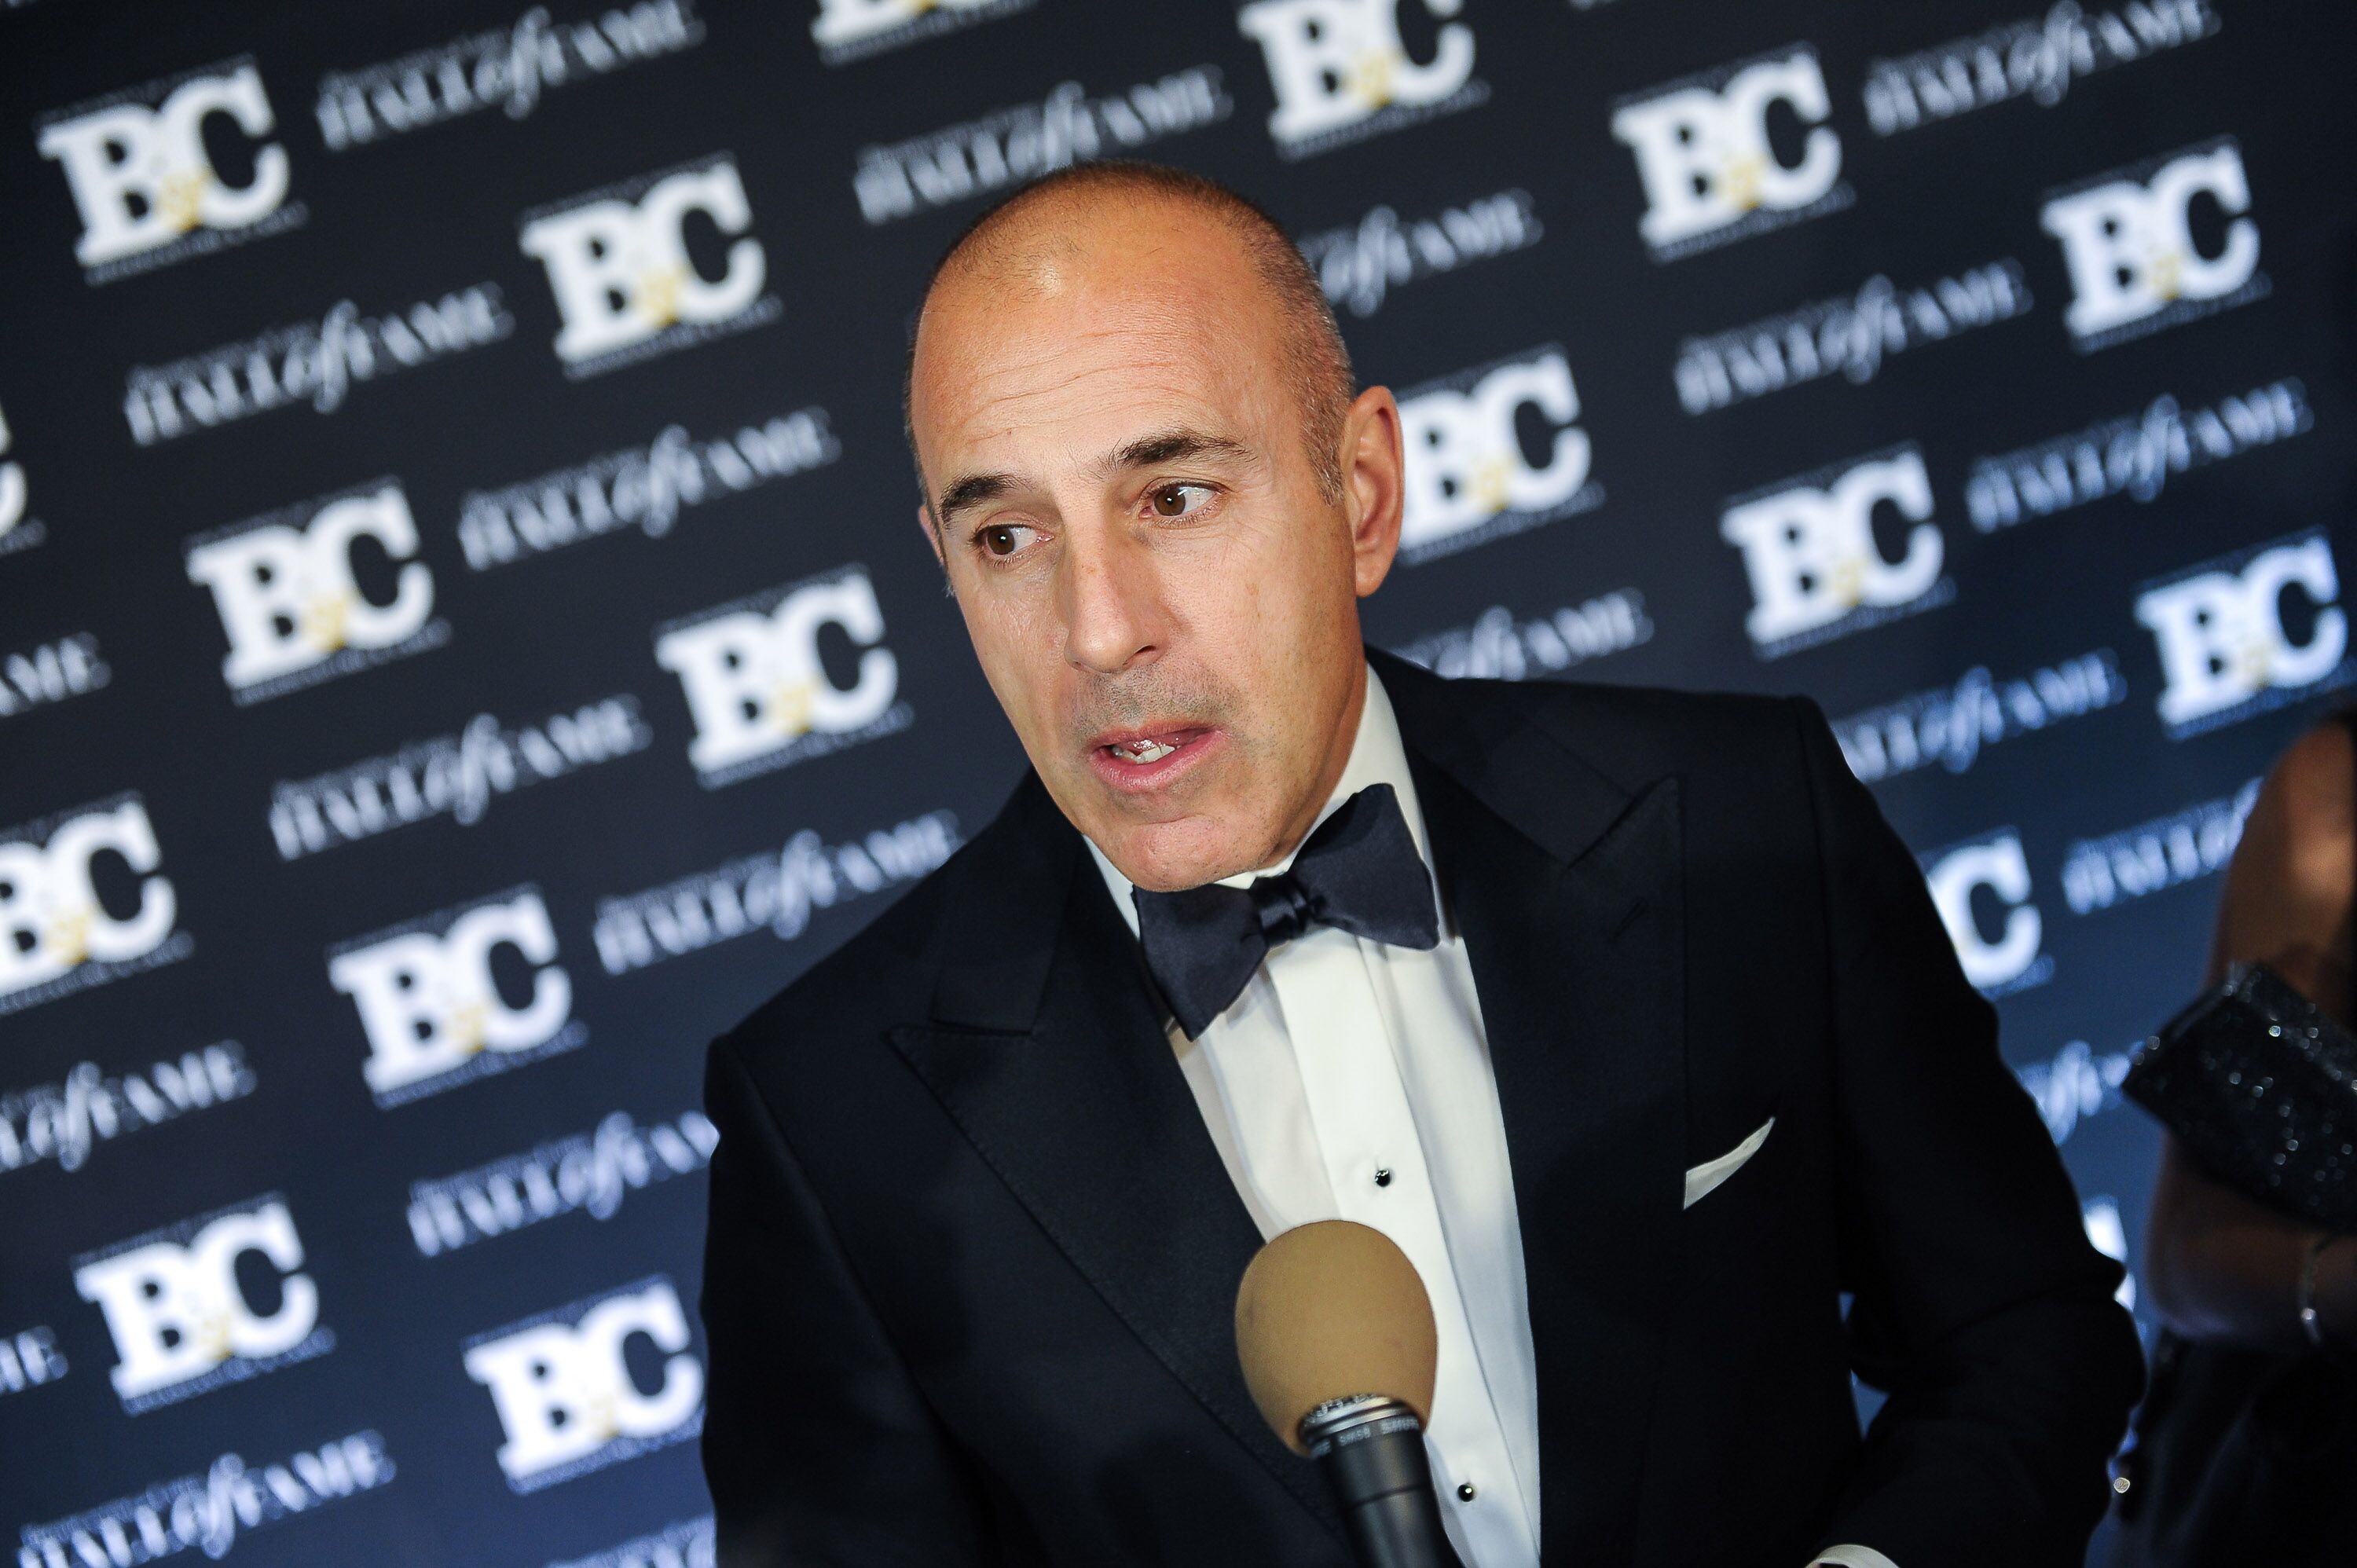 Matt Lauer at Broadcasting and Cable Hall Of Fame Awards 25th Anniversary Gala on October 20, 2015, in New York City Photo Rommel Demano Getty Images